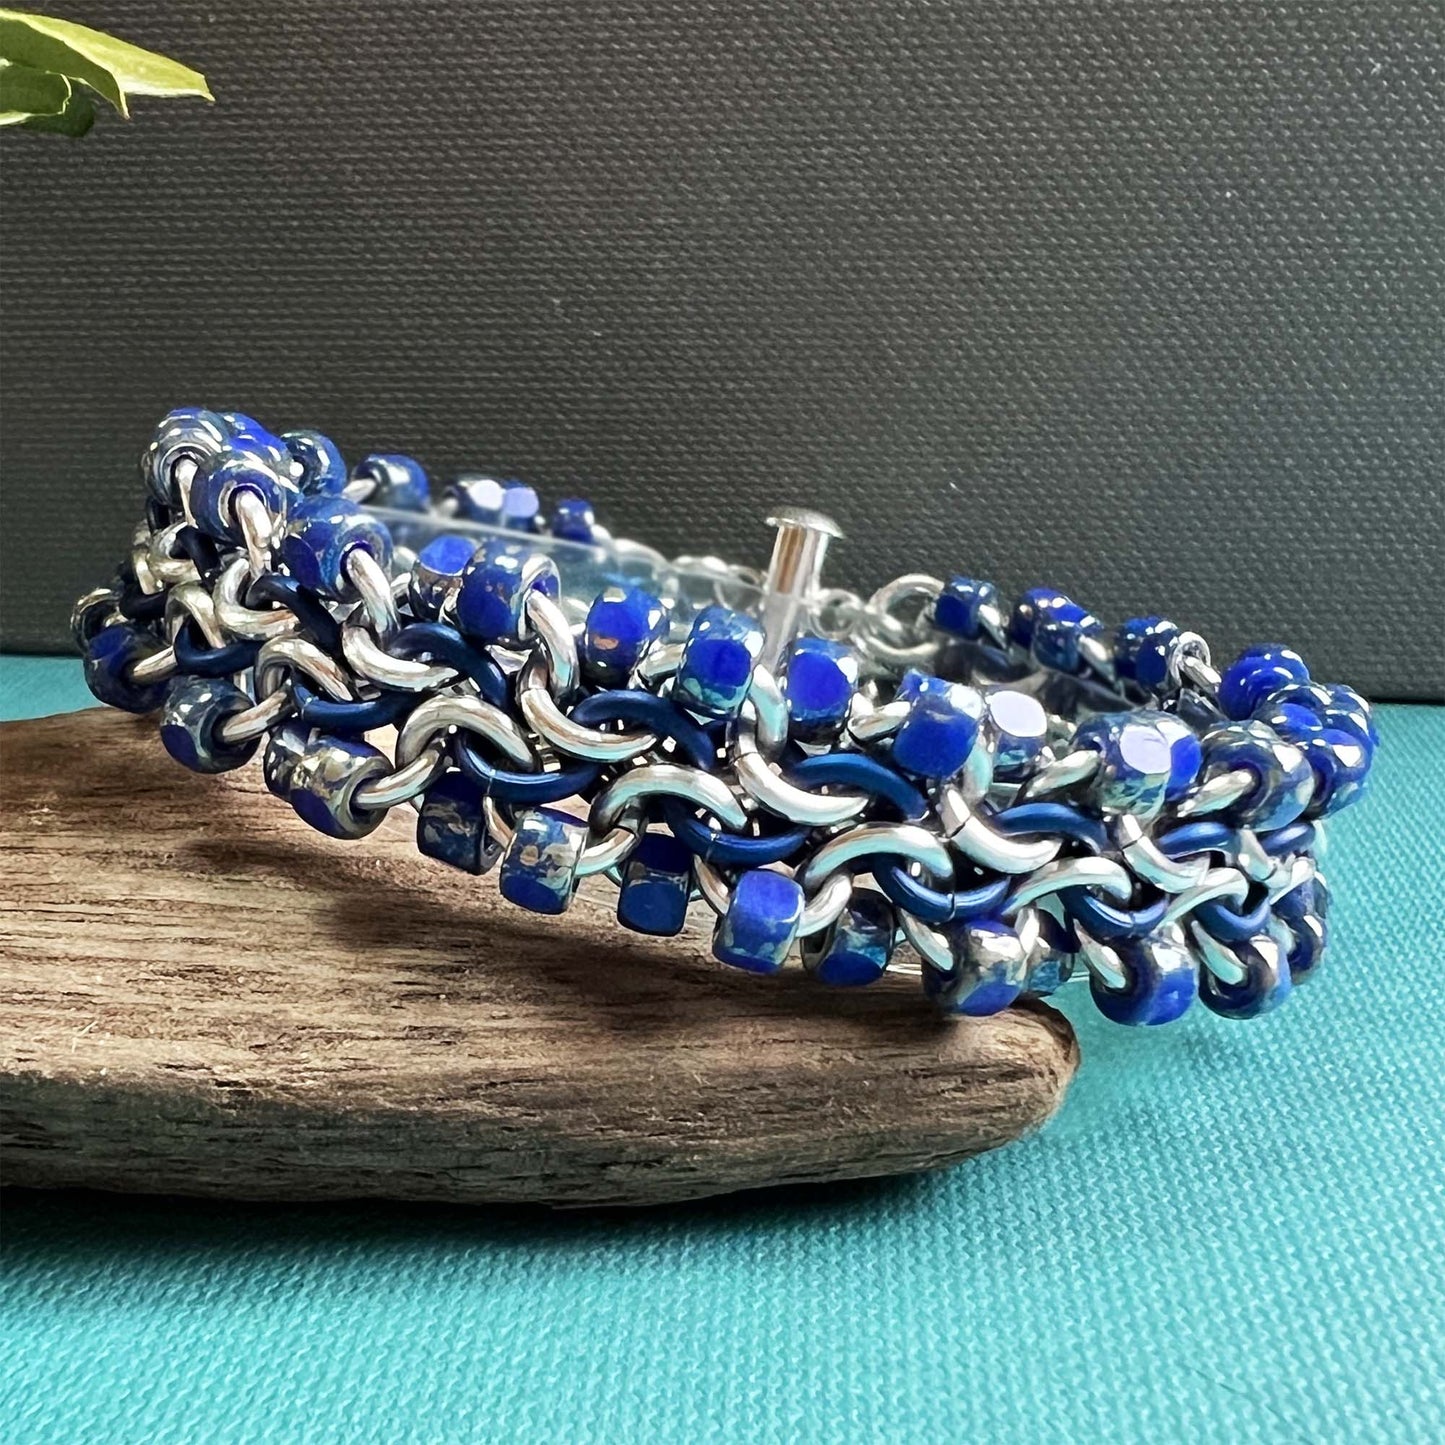 Unbalanced Bead Chain Bracelet kit with FREE video Silver Matte Navy and Blue Rembrandt